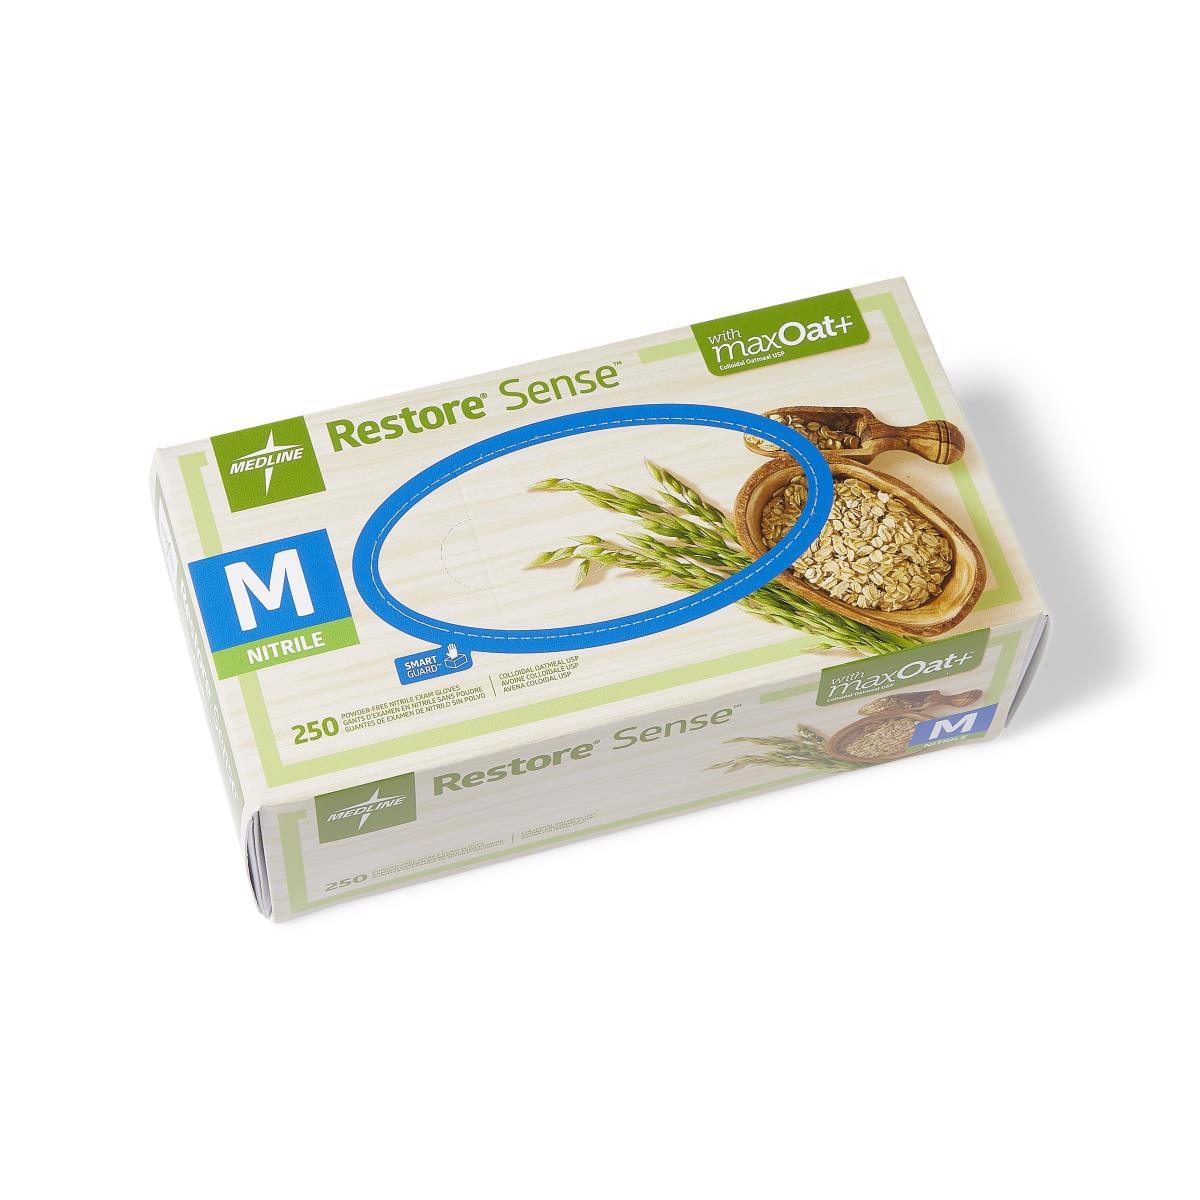 Restore® Sense Powder-Free Nitrile Gloves with maxOat+ colloidal oatmeal